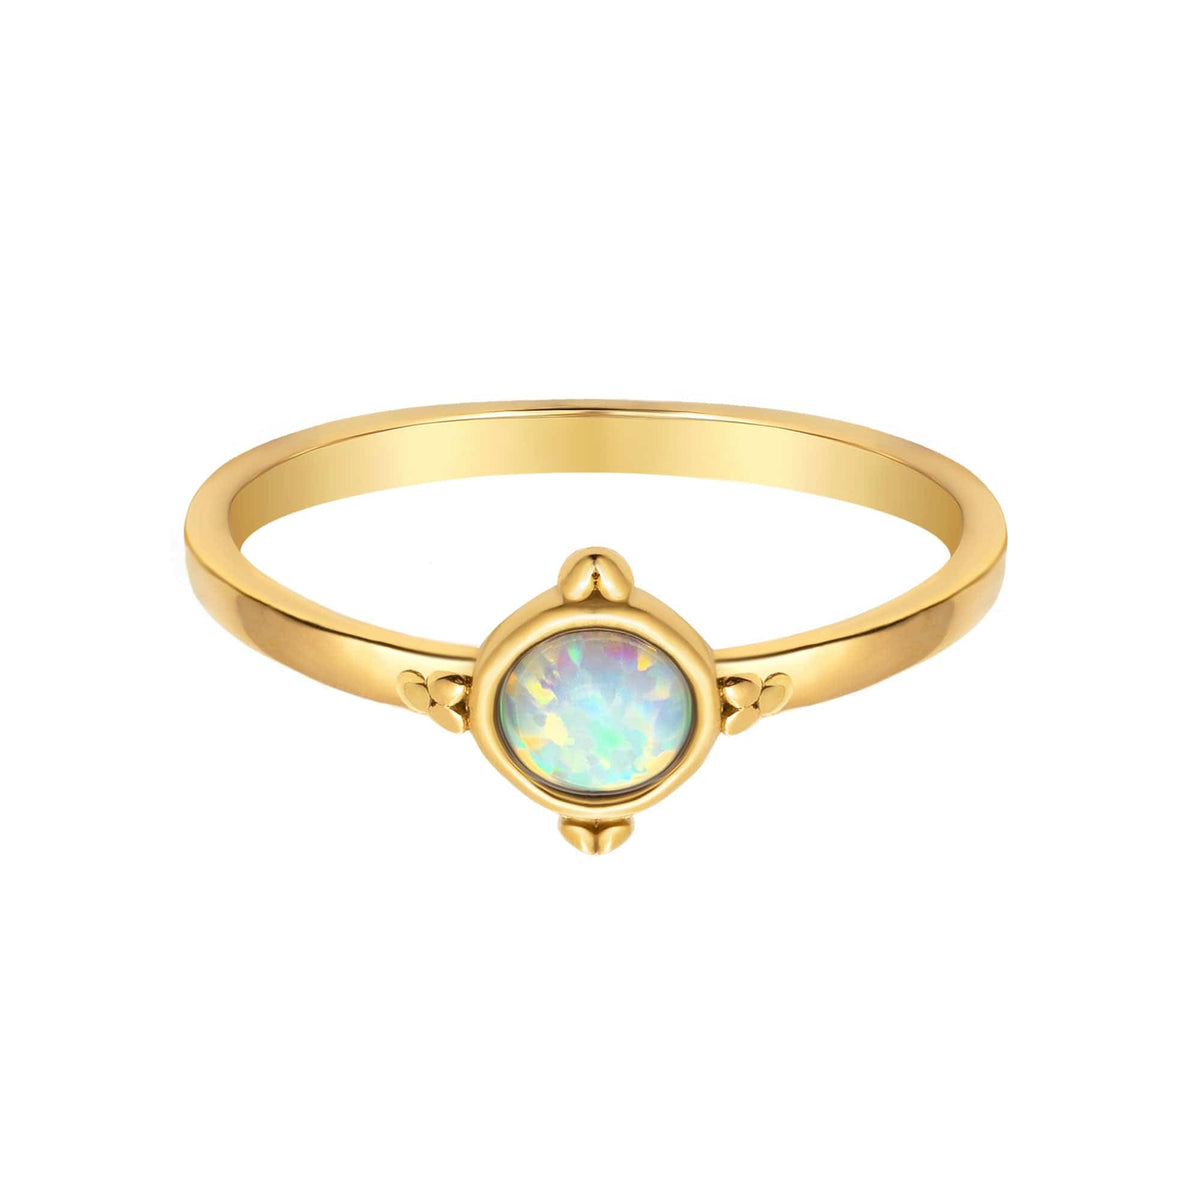 BohoMoon Stainless Steel Aubrey Opal Ring Gold / US 6 / UK L / EUR 51 (small)